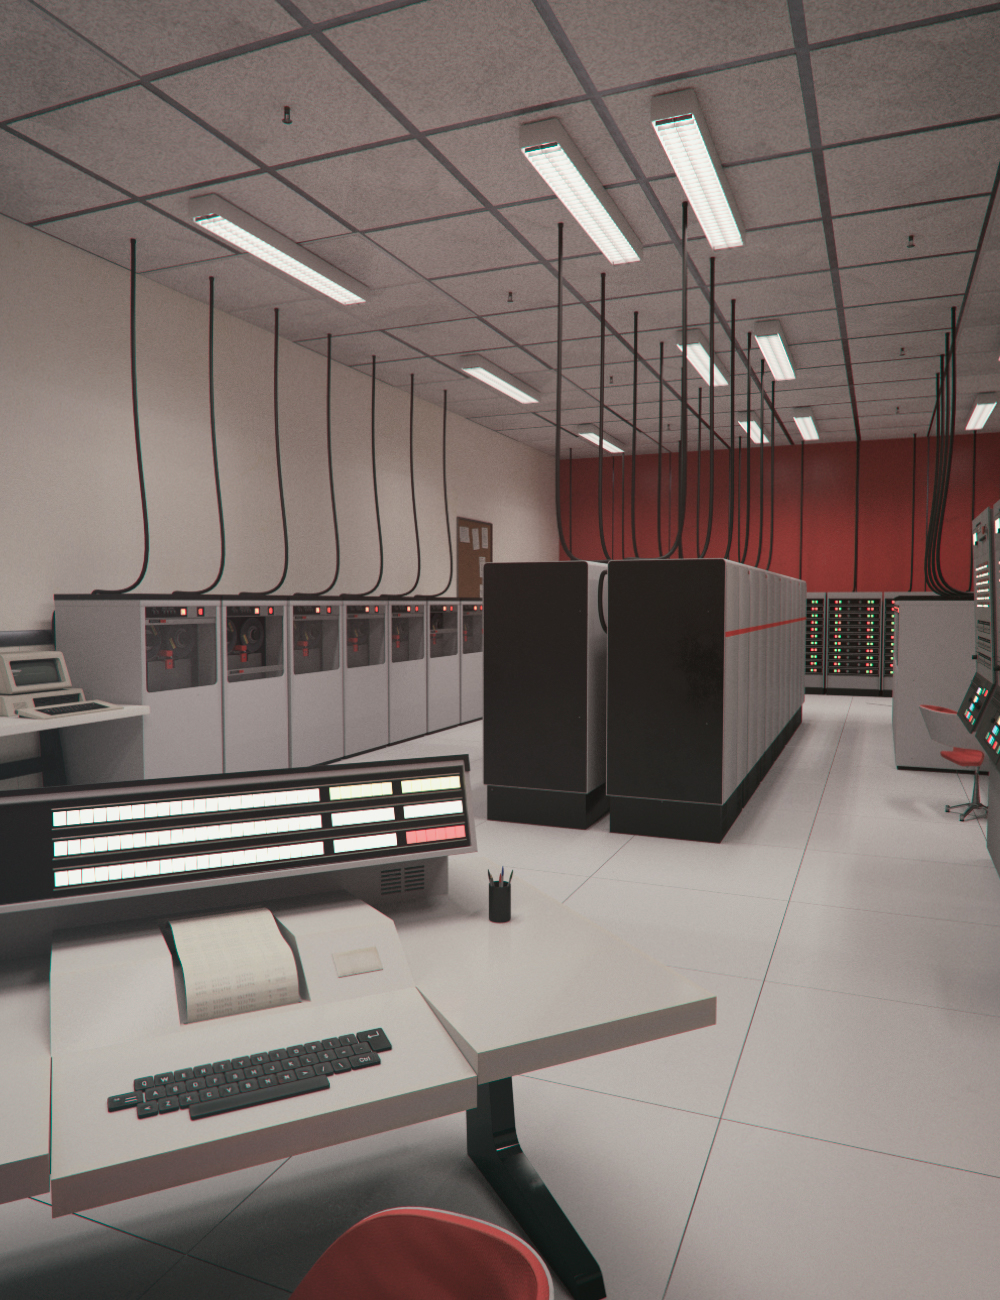 Retro Server Room by: Mely3D, 3D Models by Daz 3D